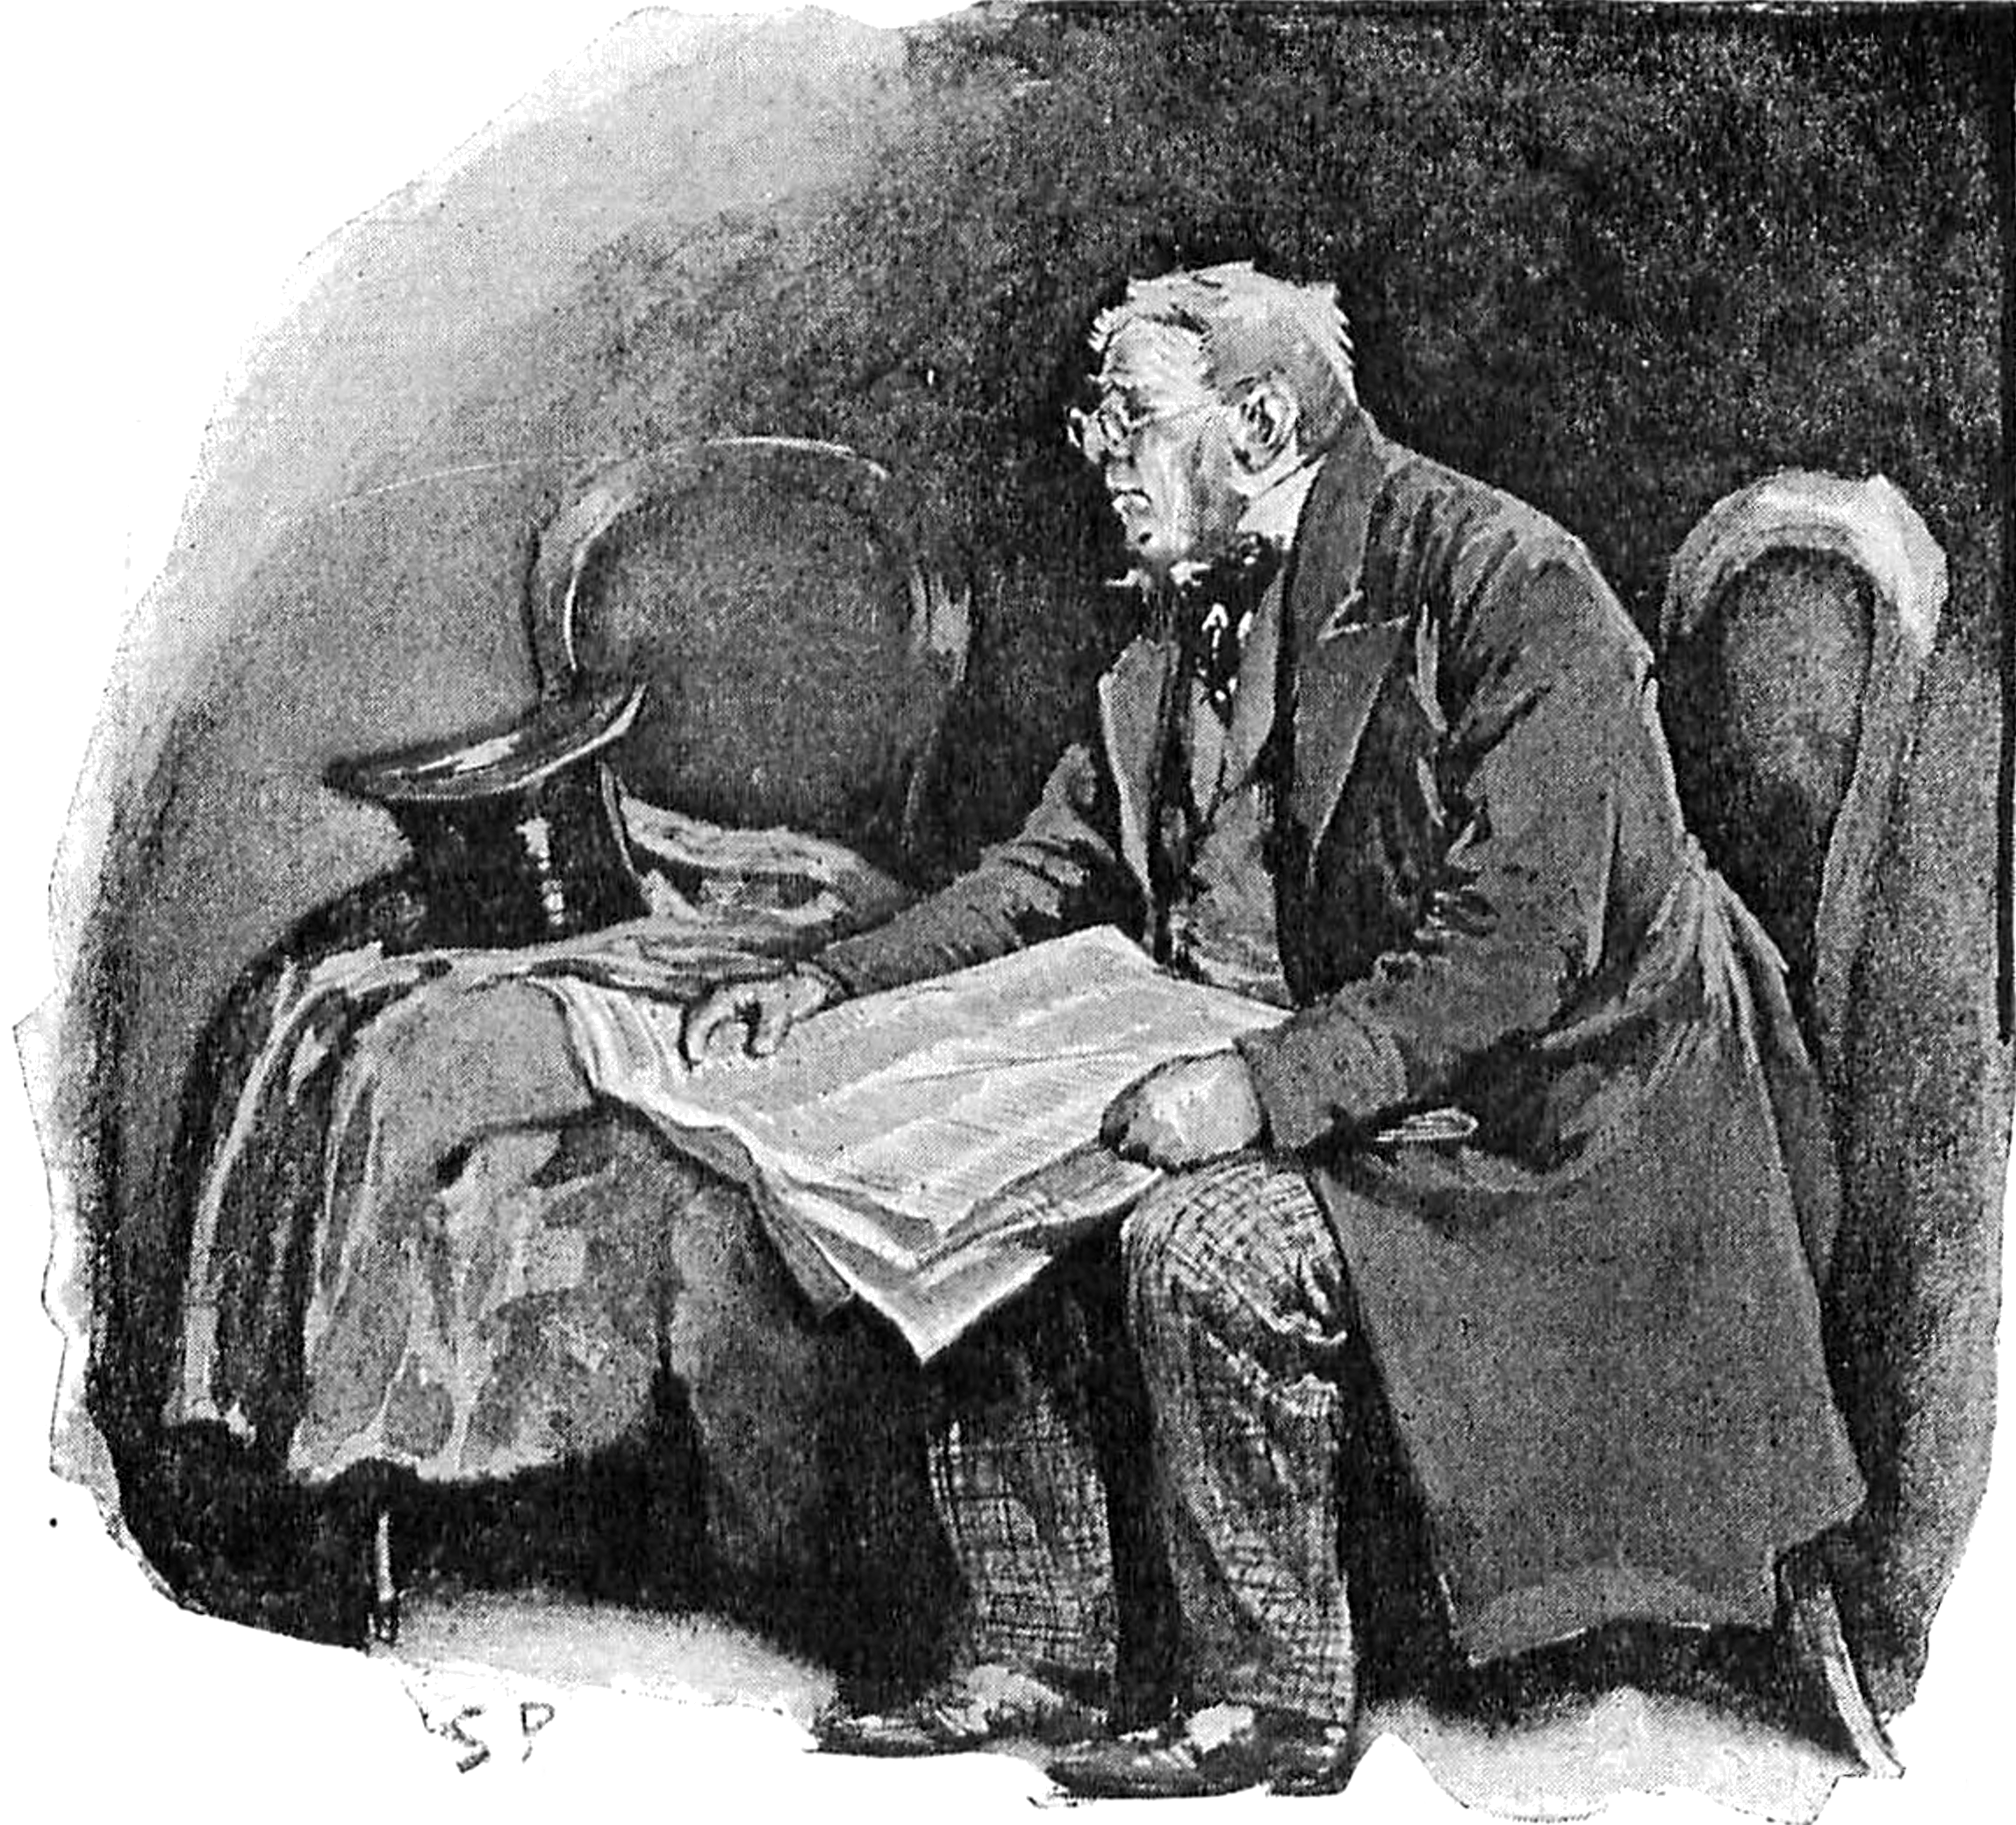 Illustration of a person sitting on a chair holding sheets of paper, with a hat on another chair behind and to the left